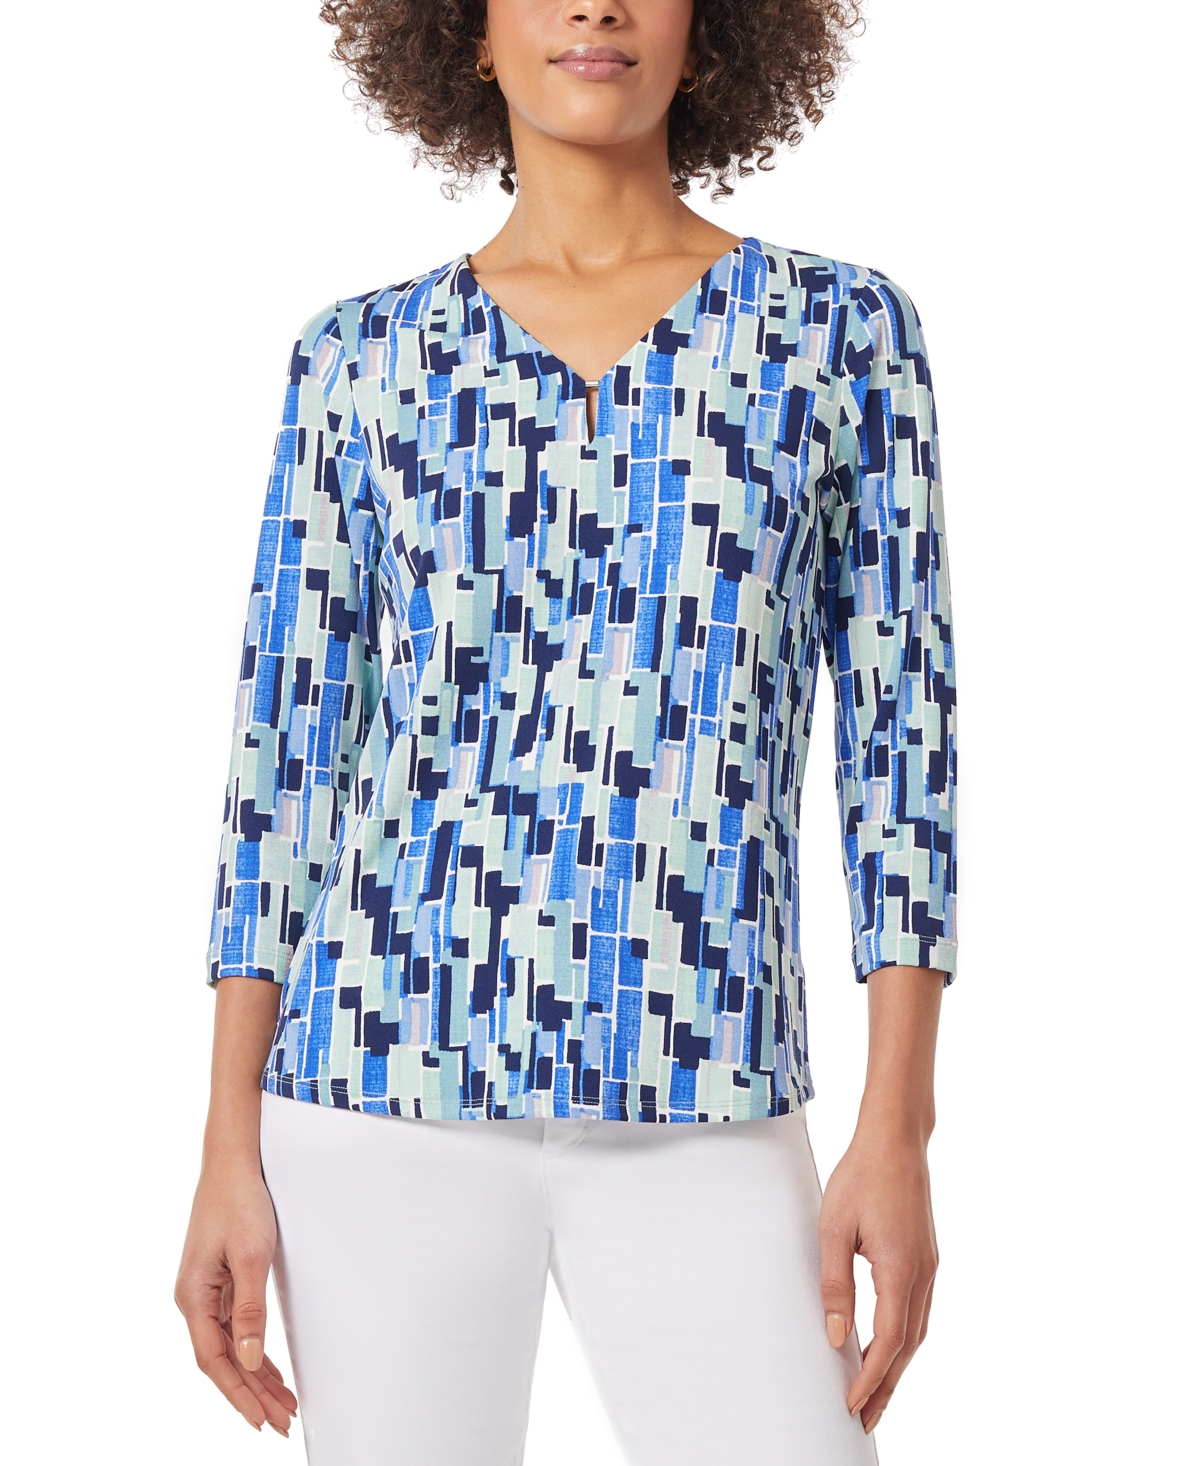 Women's Printed Moss Crepe Embellished-Neck Top - Light Sapphire